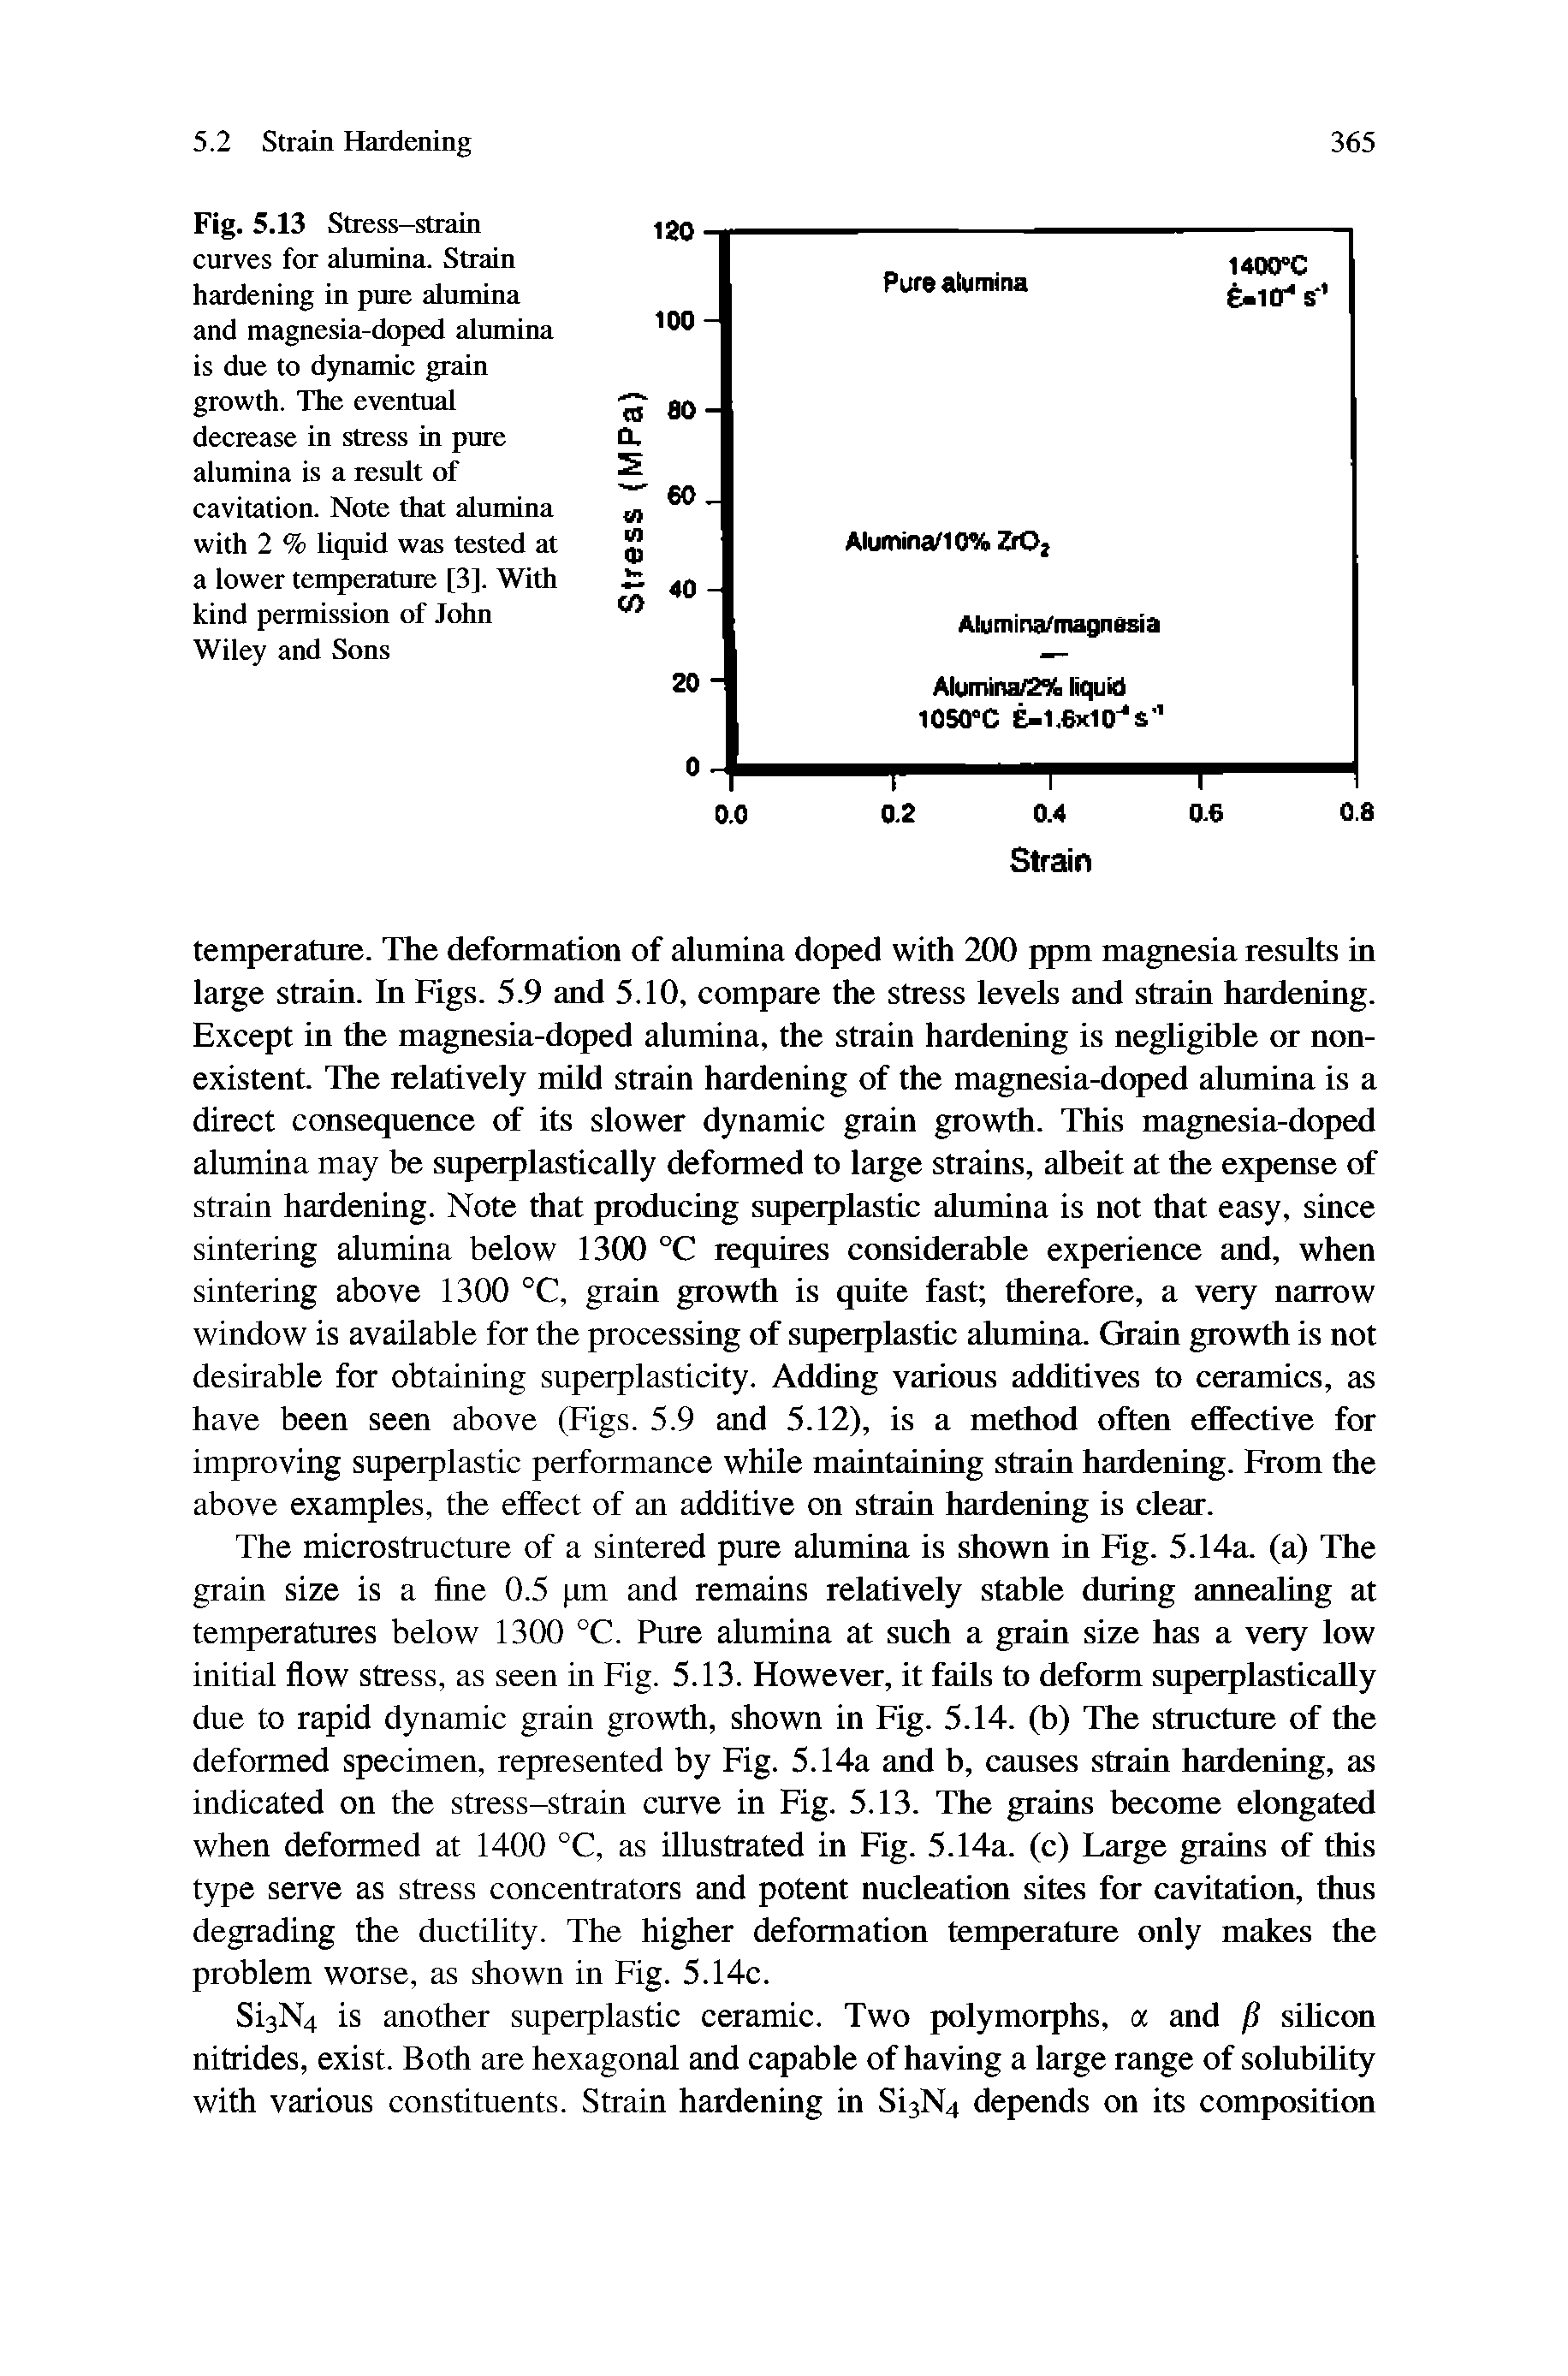 Fig. 5.13 Stress-strain curves for alumina. Strain hardening in pure alumina and magnesia-doped alumina is due to dynamic grain growth. The eventual decrease in stress in pure alumina is a result of cavitation. Note that alumina with 2 % liquid was tested at a lower temperature [3]. With kind permission of John Wiley and Sons...